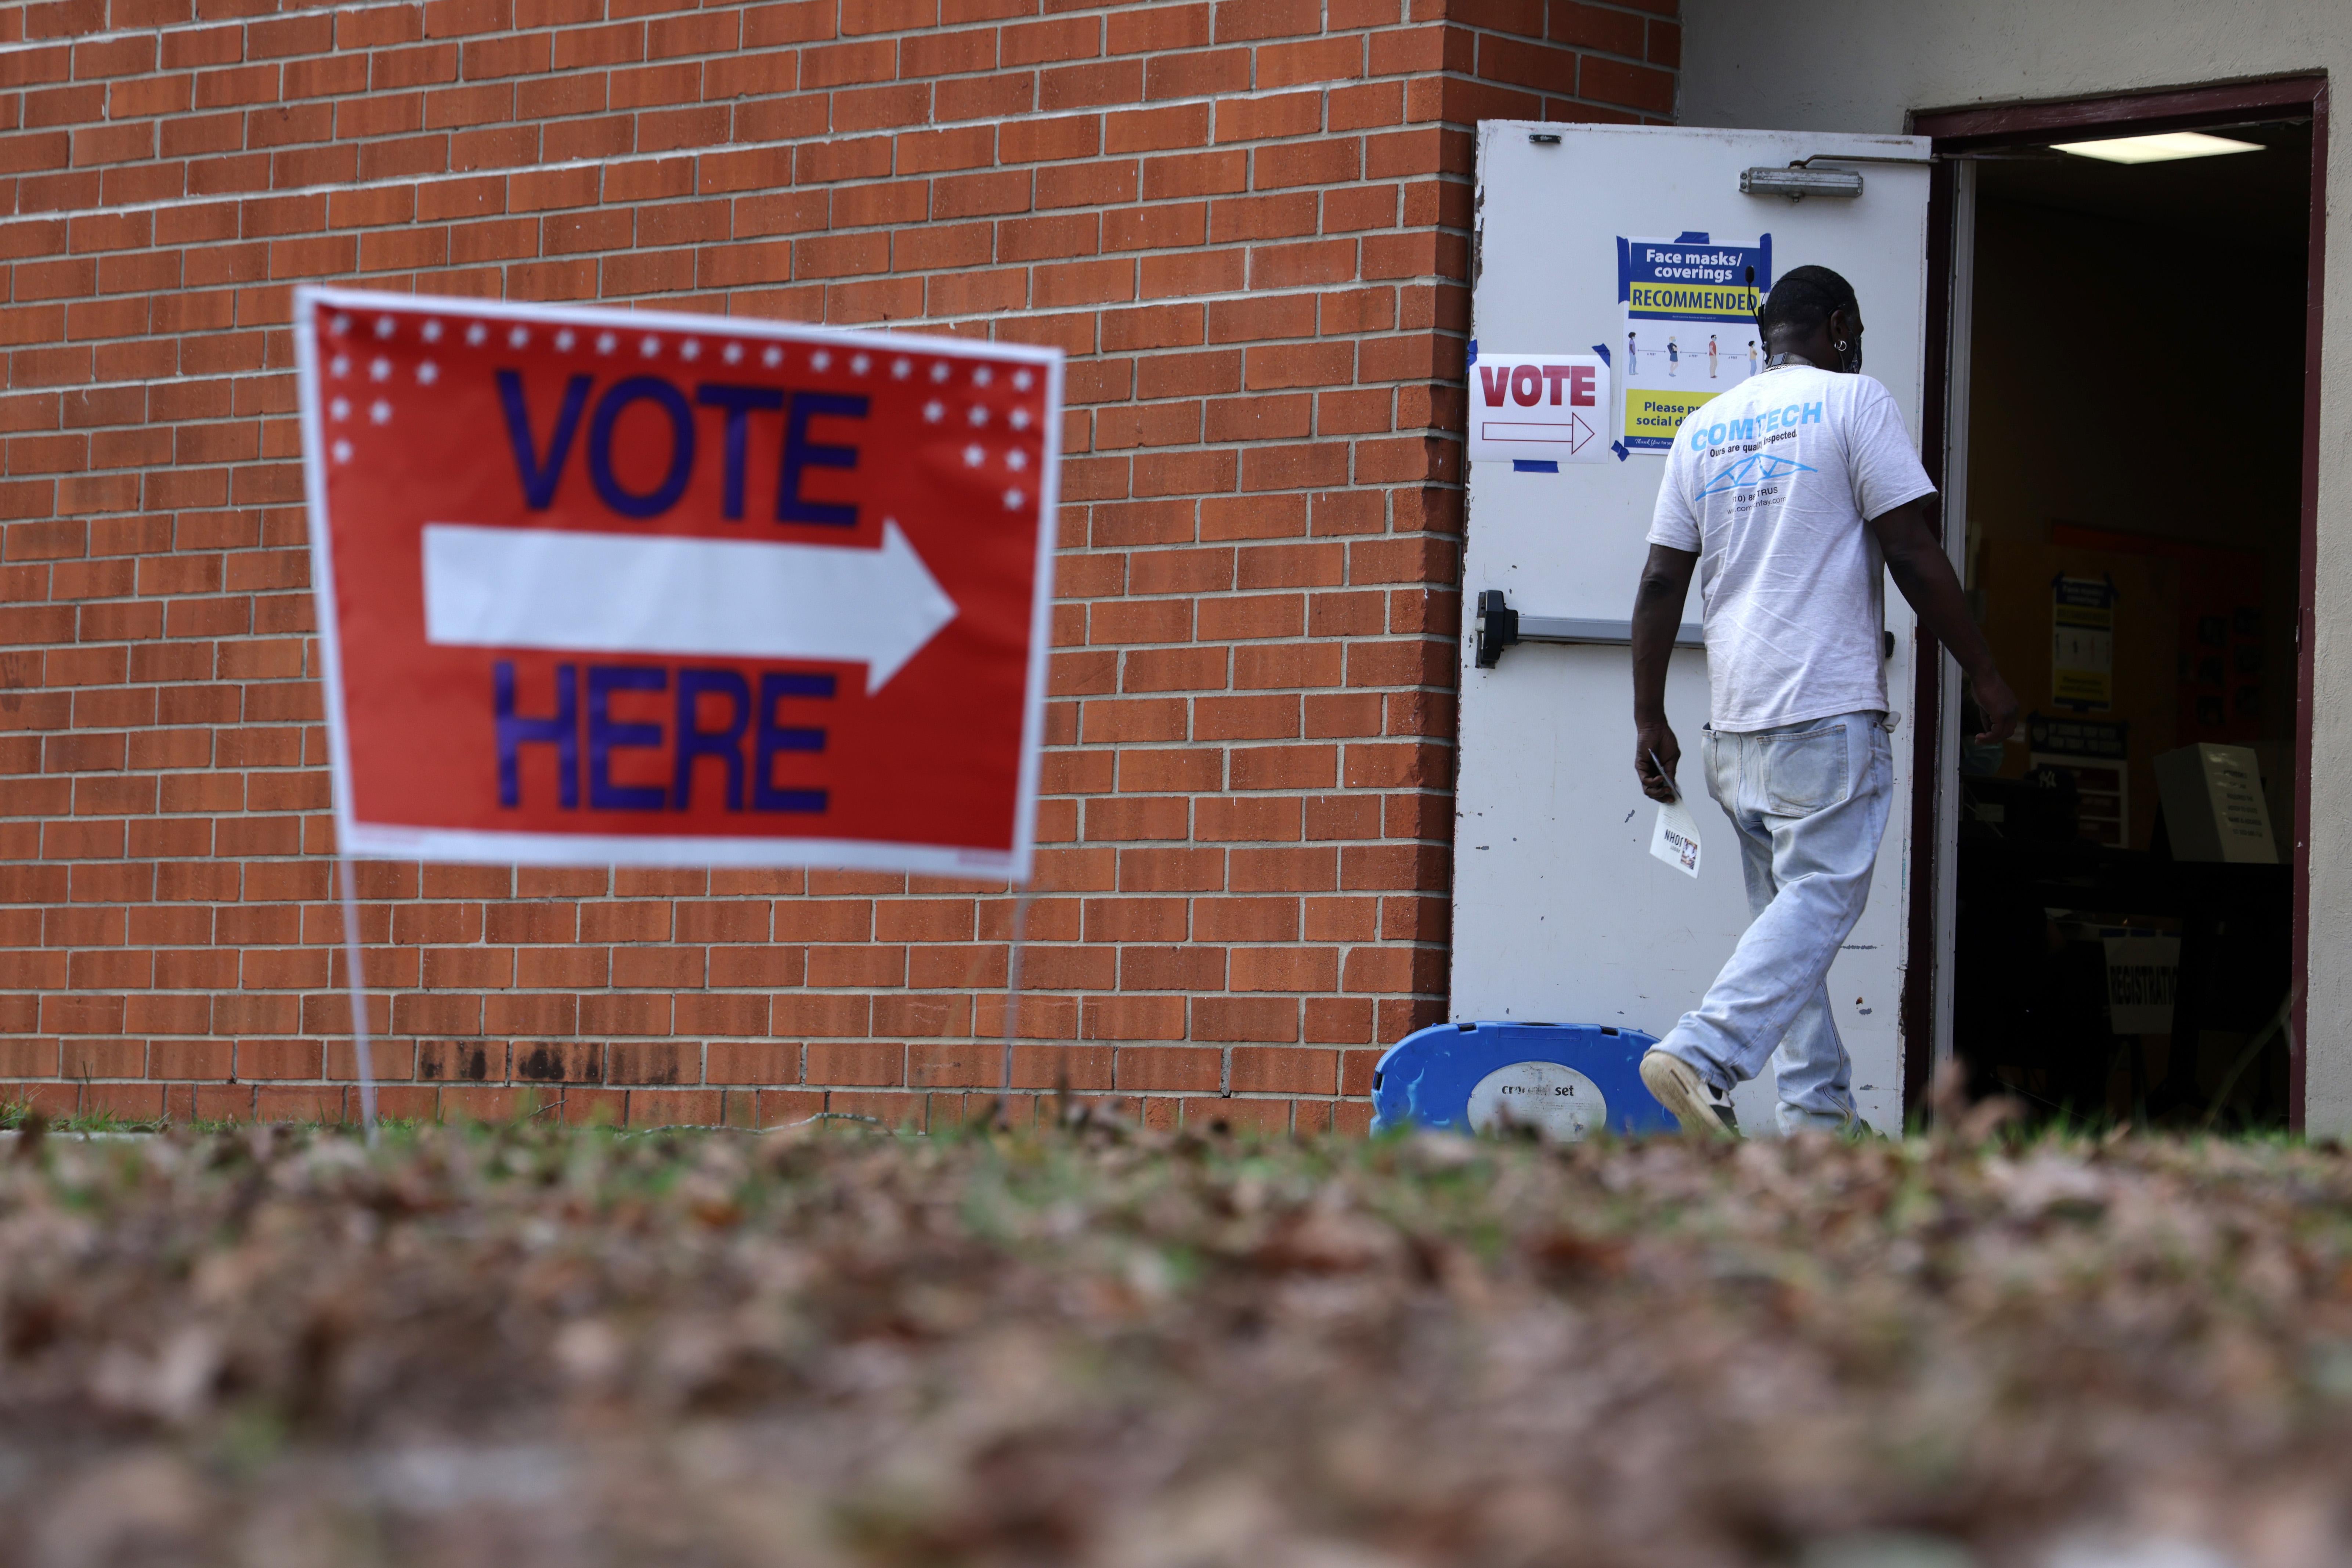 A man walks through the open door of a brick building that has a "Vote Here" sign out front